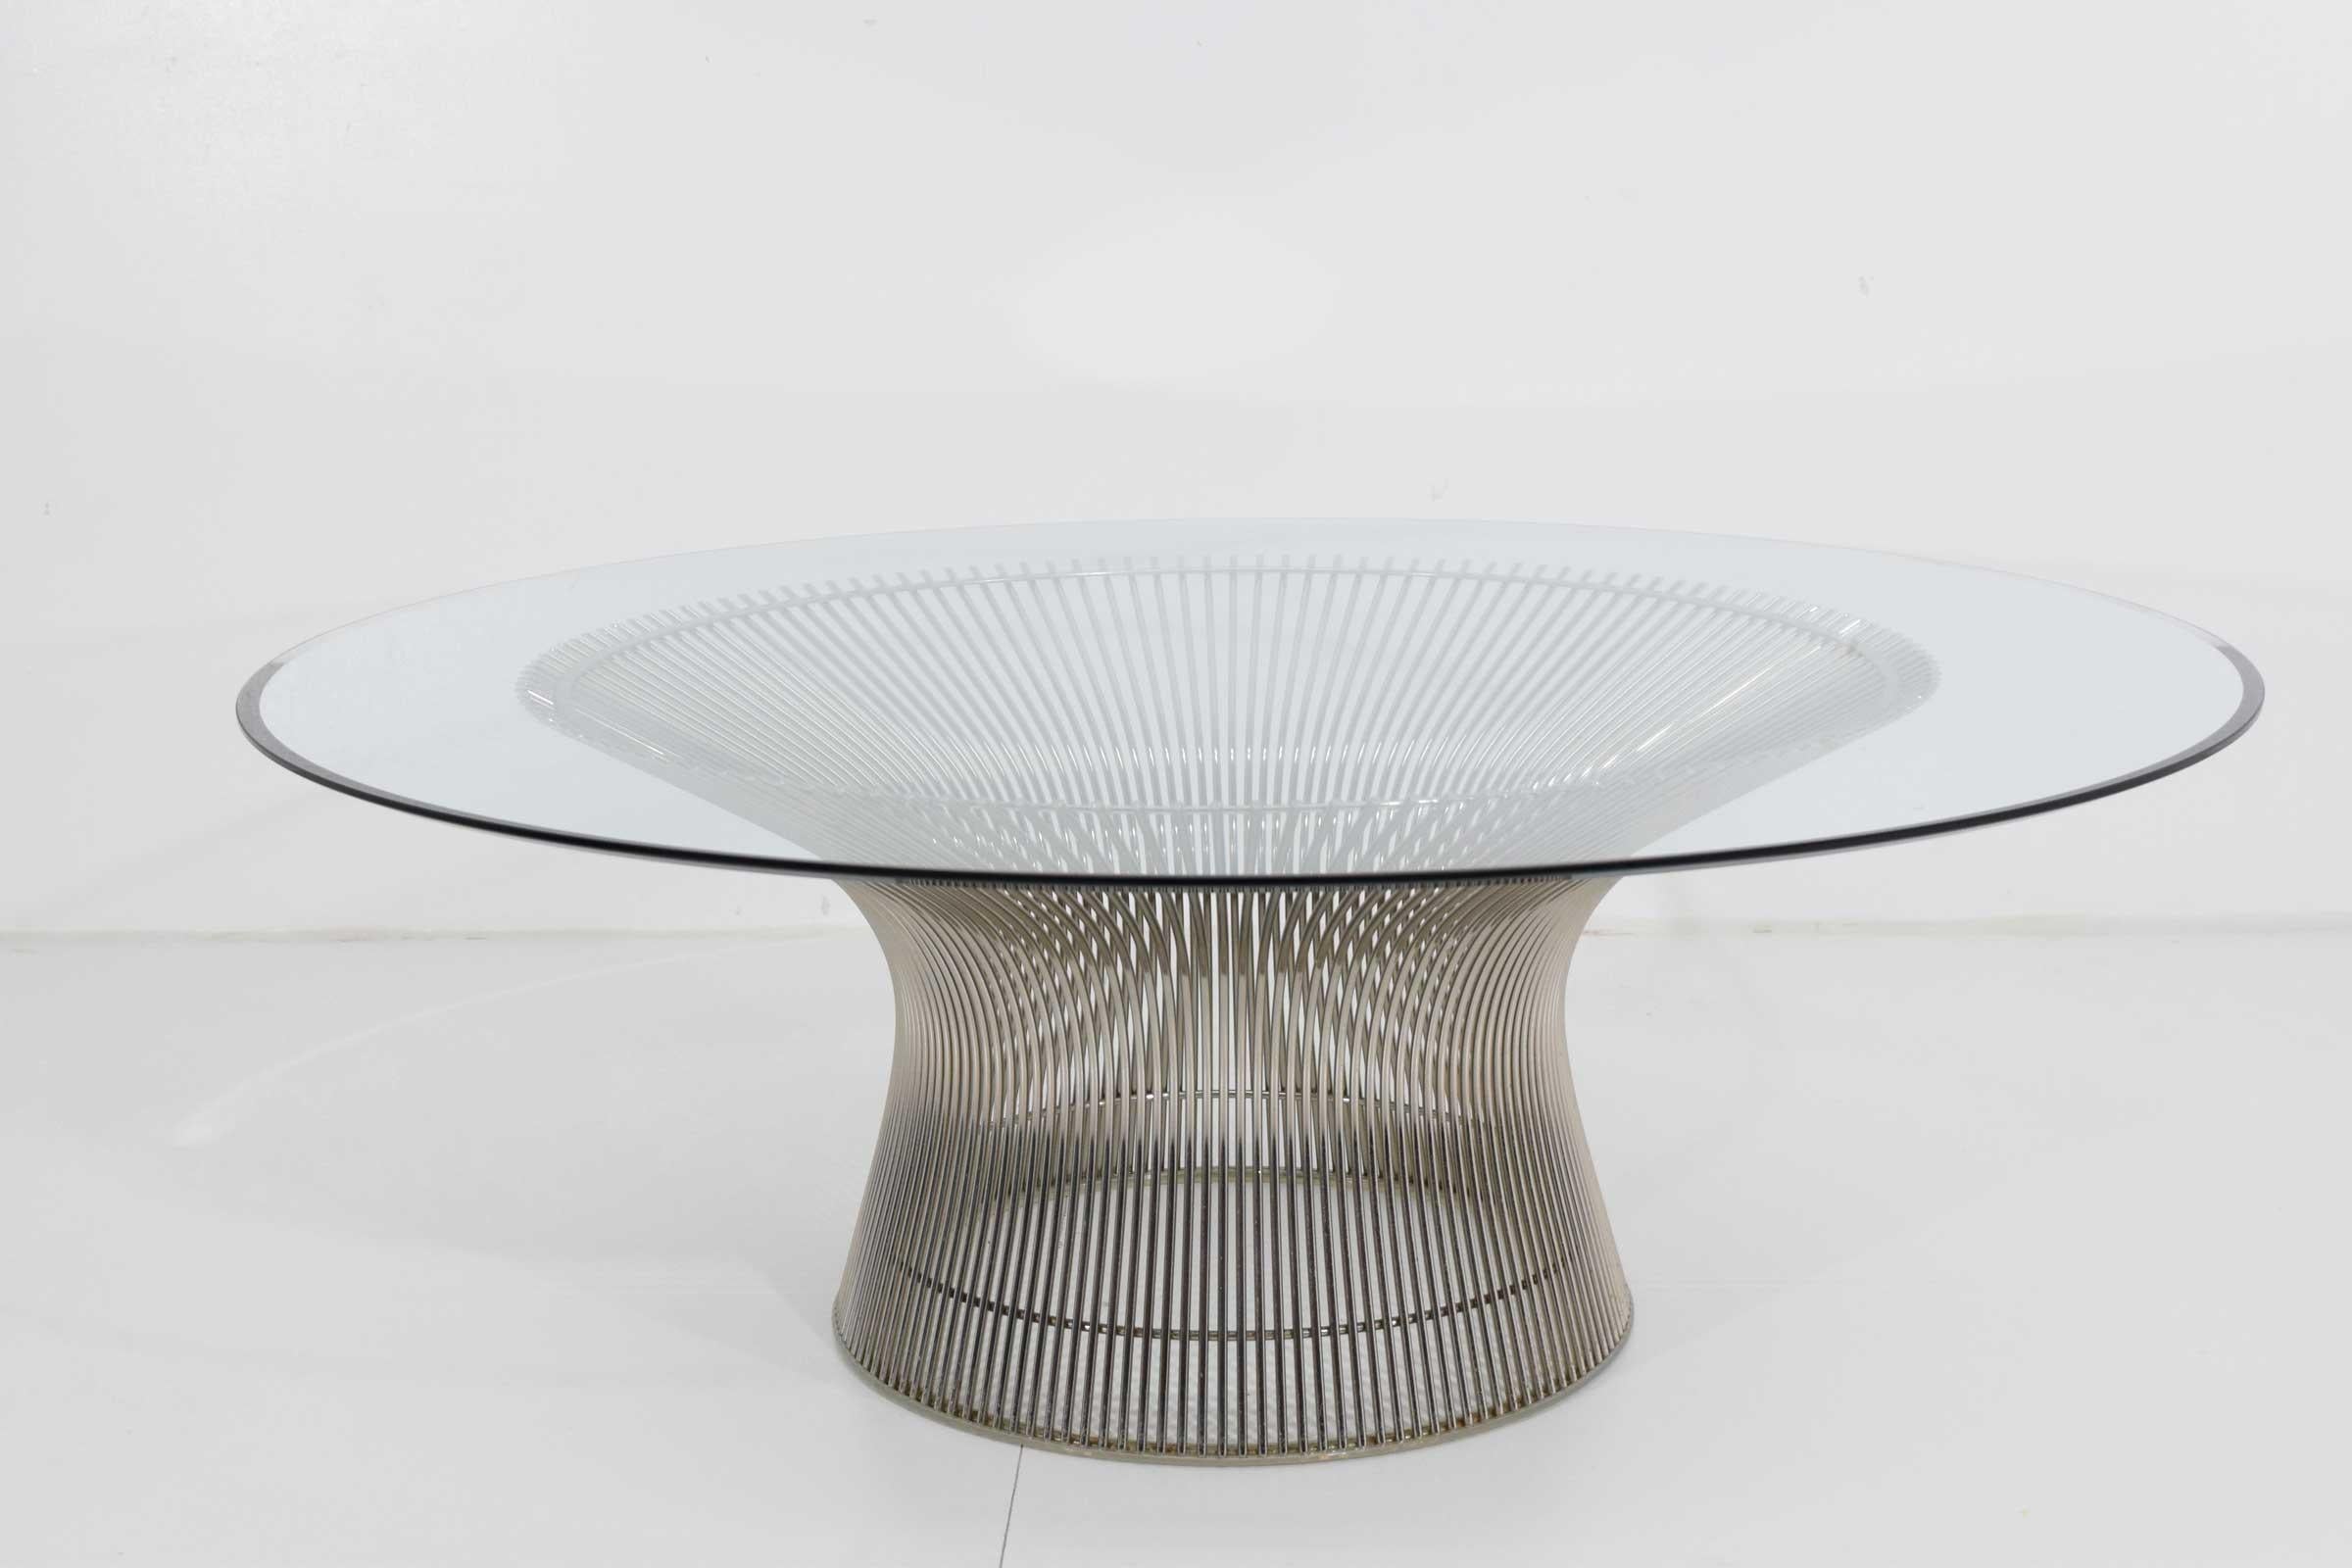 Great looking Warren Platner cocktail table, nice glass with a beveled edge. Requiring as many as 1,000 welds and crafted out of wire and space, the coffee table demonstrates Platner’s belief that there is room in modernism “for the kind of